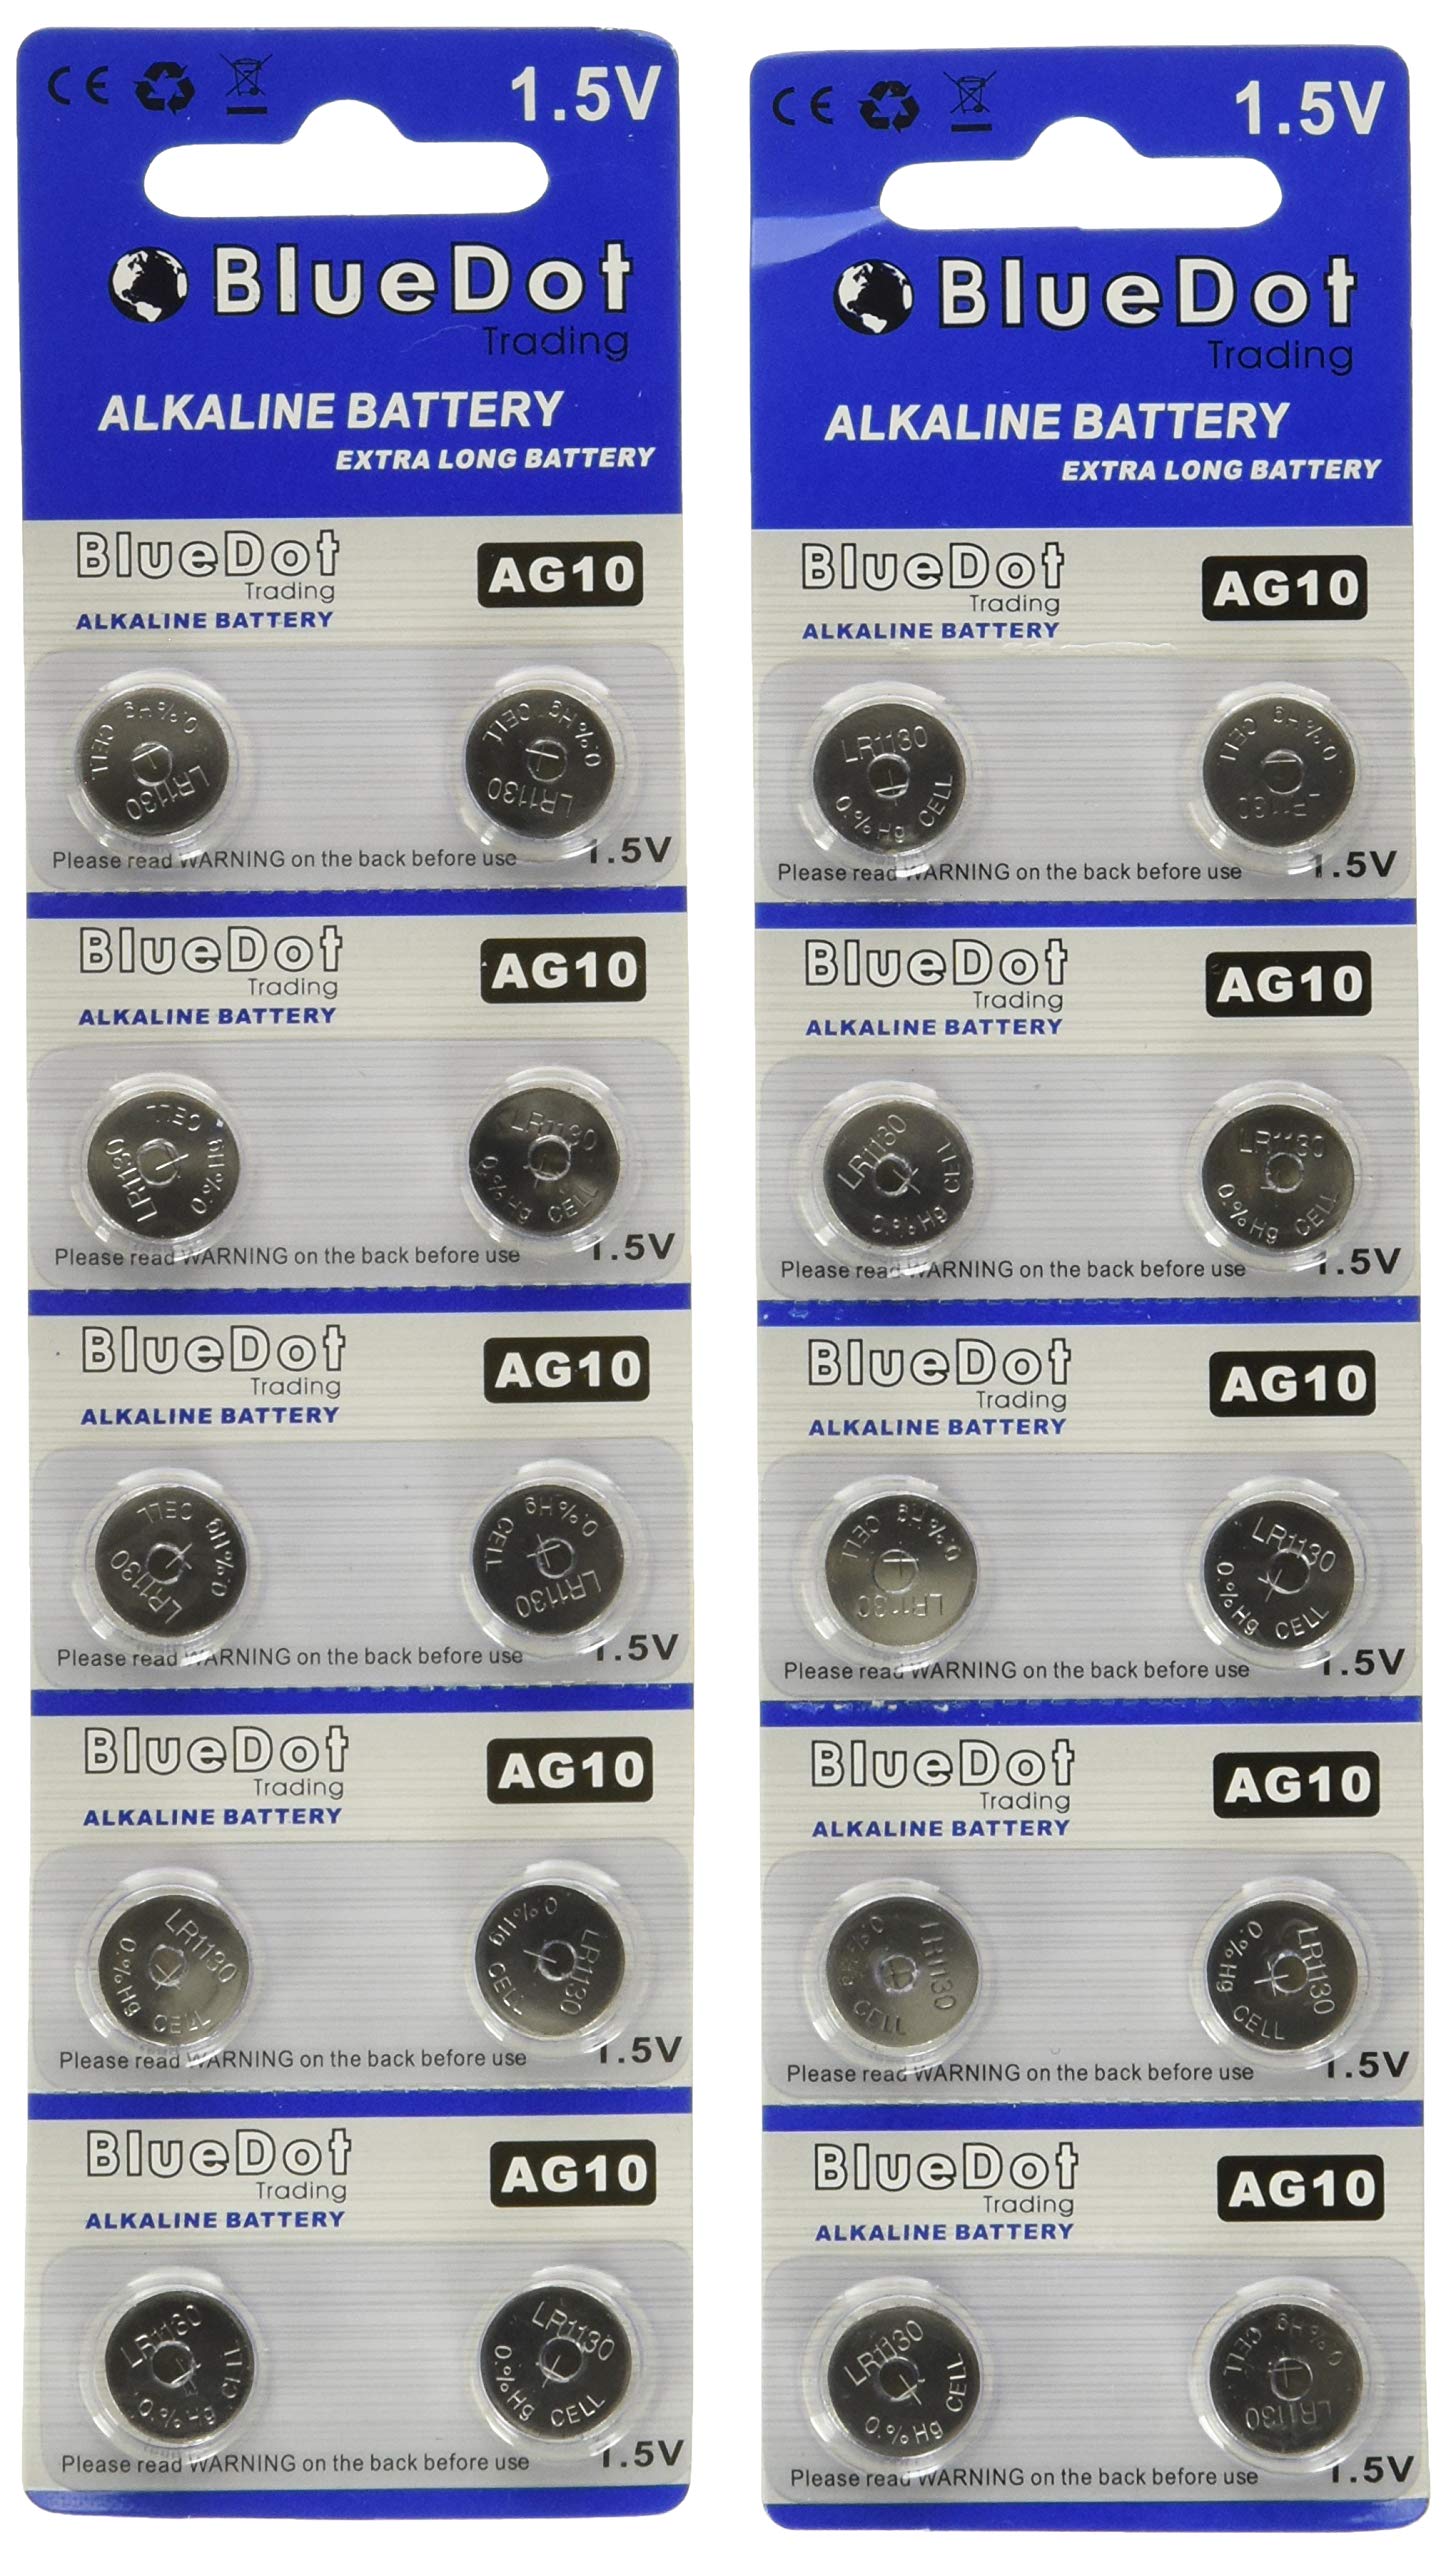 BlueDot Trading AG10 LR1130 LR54 LR54 1.5V Alkaline Coin Cell Battery for Watch, Hearing Aid, Calculator, Flashlights, Keyless Entry, Batteries, 20 Count